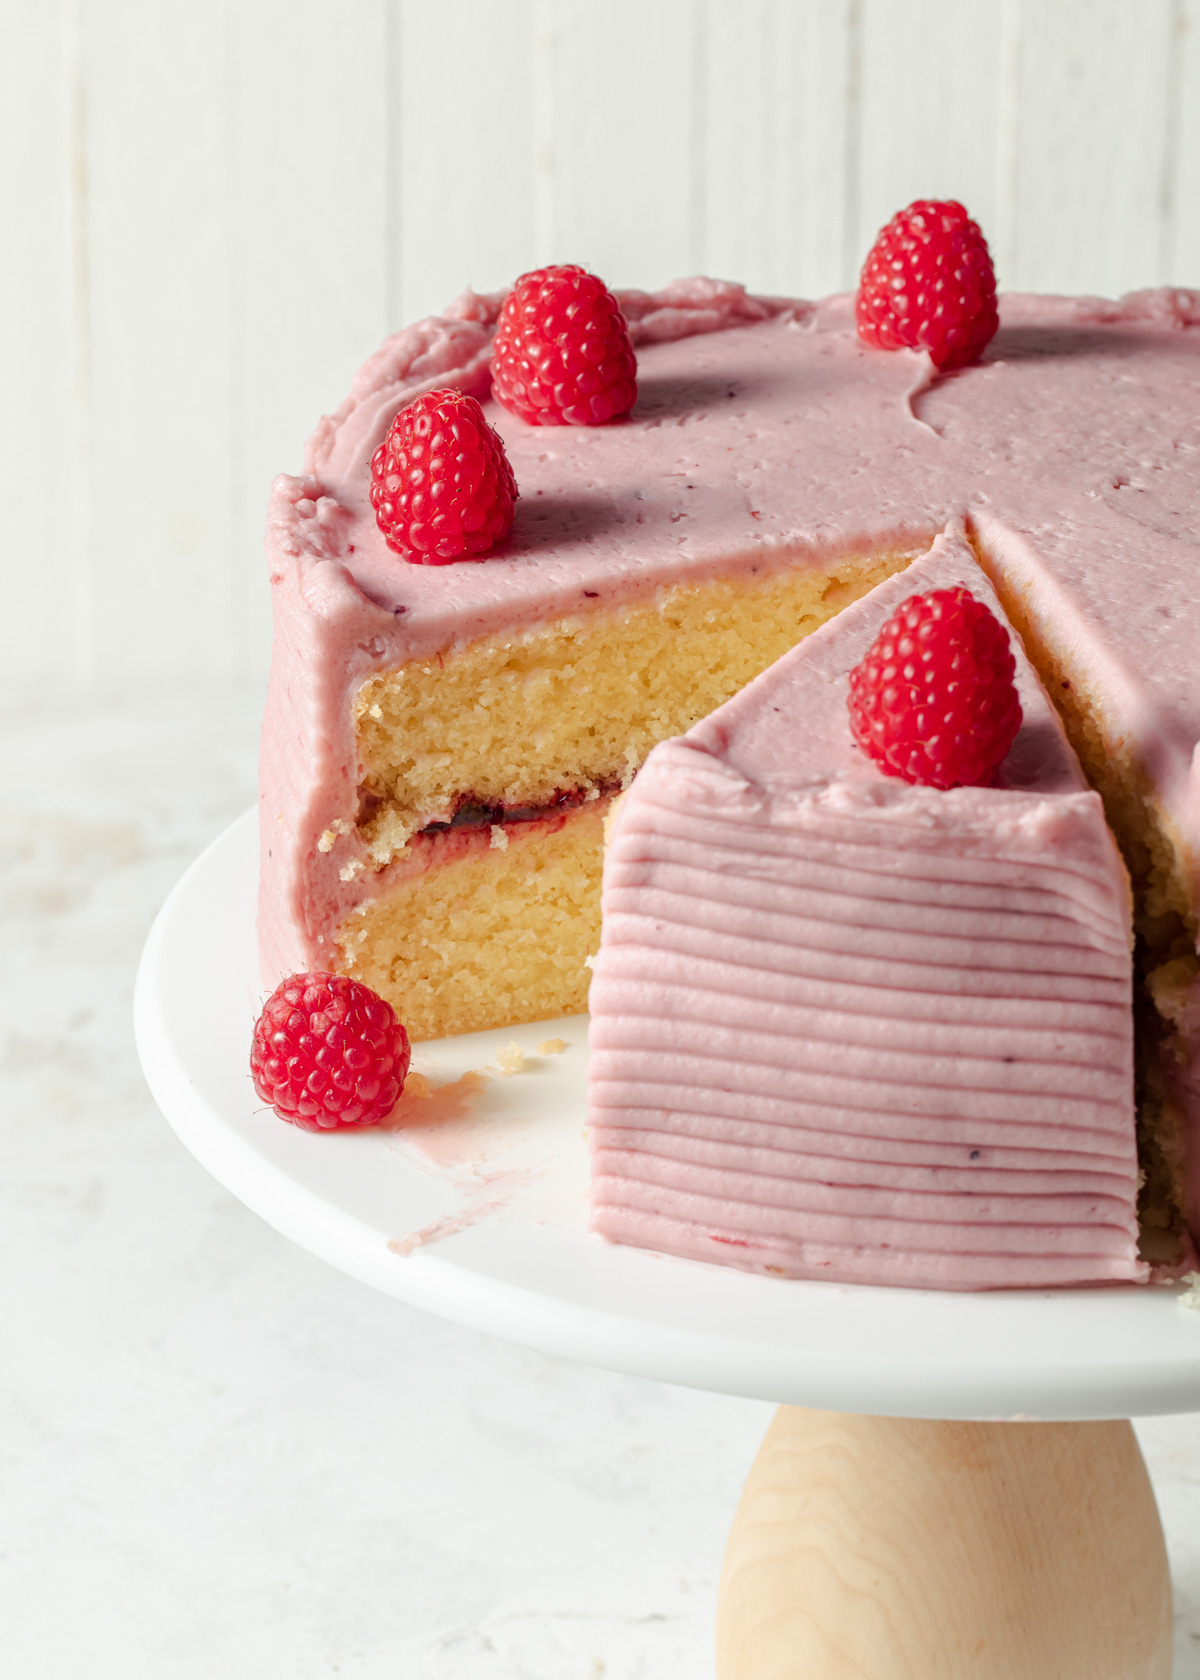 A close-up of a sliced almond layer cake with raspberry frosting and jam filling